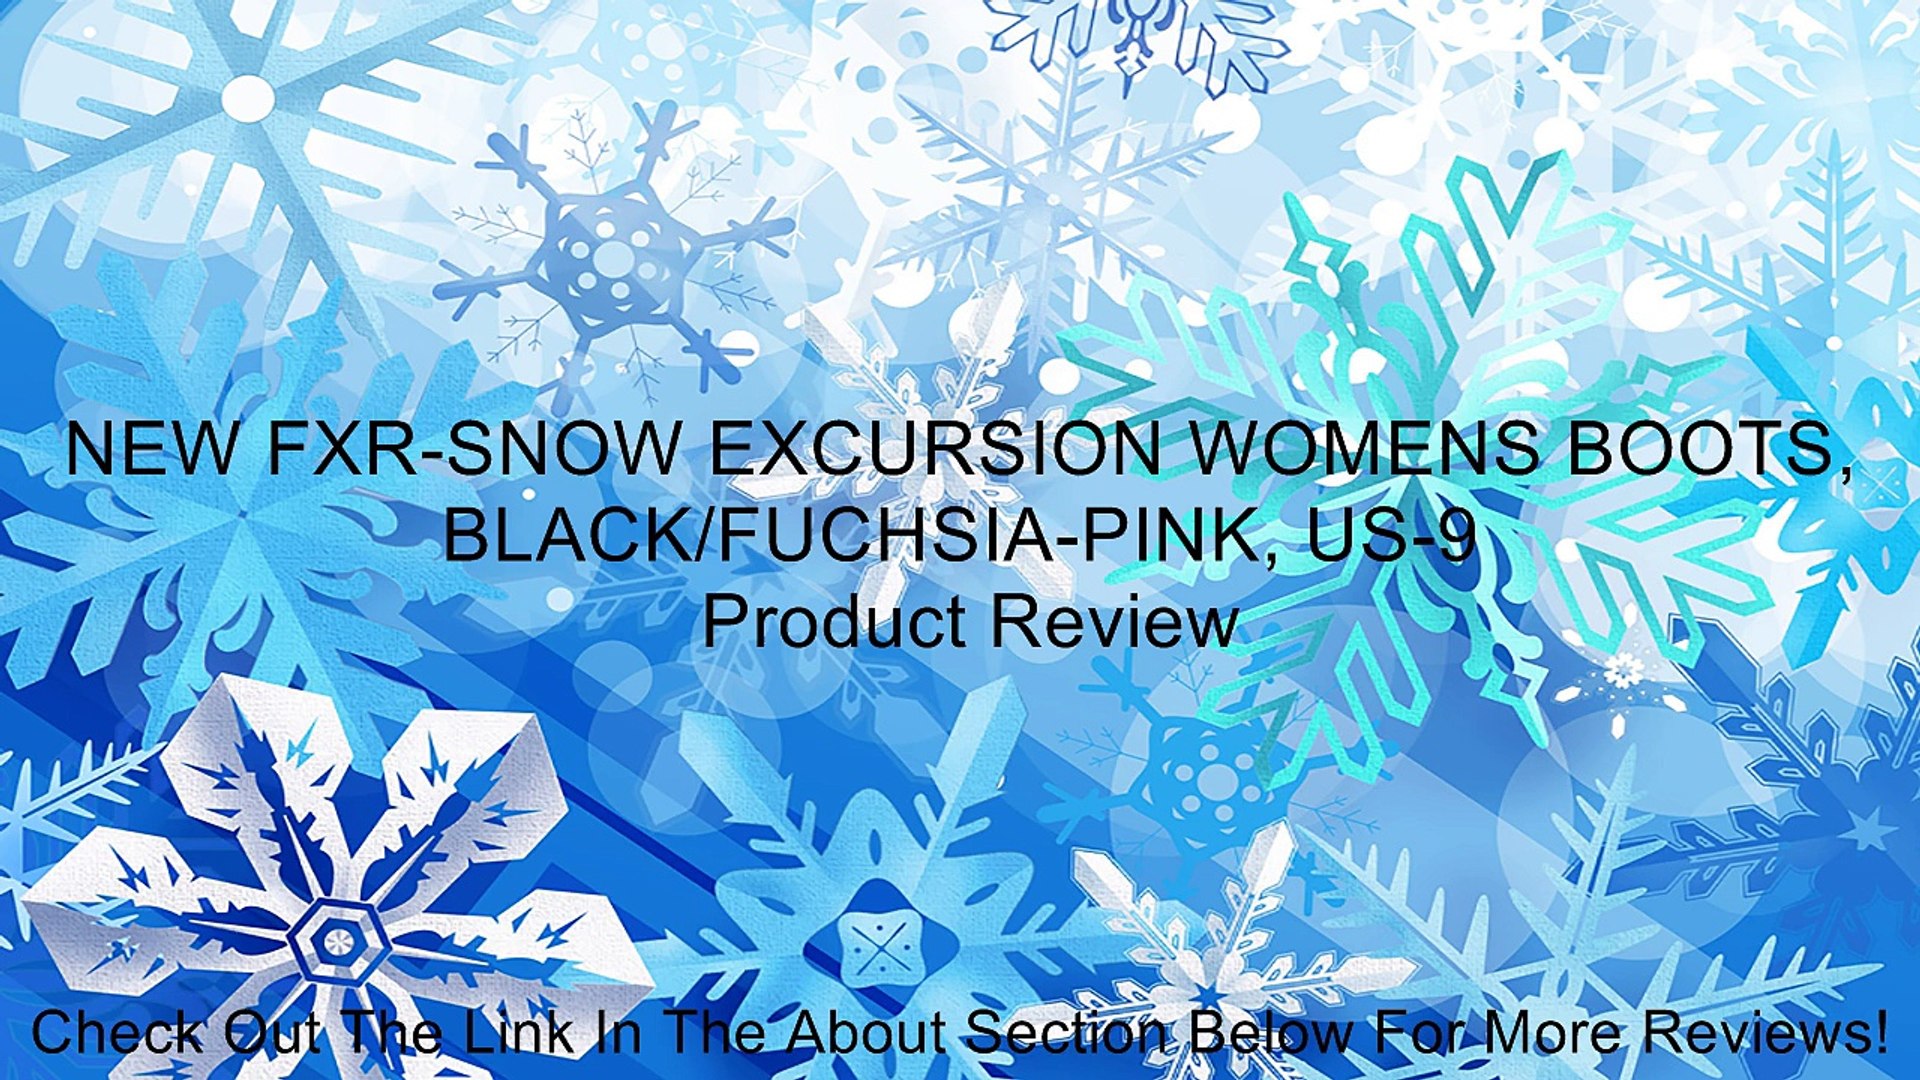 ⁣NEW FXR-SNOW EXCURSION WOMENS BOOTS, BLACK/FUCHSIA-PINK, US-9 Review